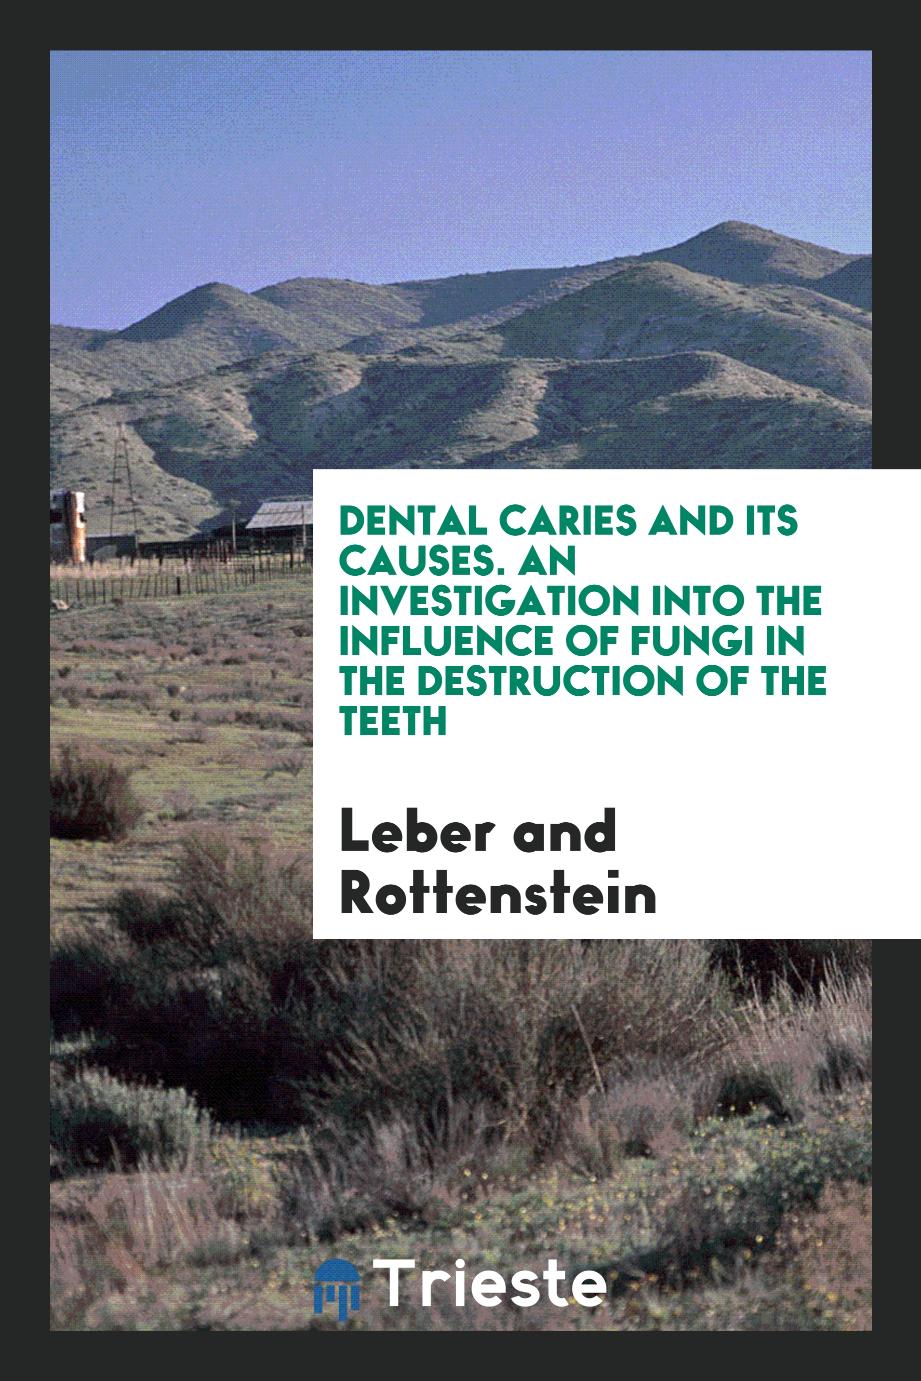 Dental Caries and Its Causes. An Investigation into the Influence of Fungi in the Destruction of the Teeth